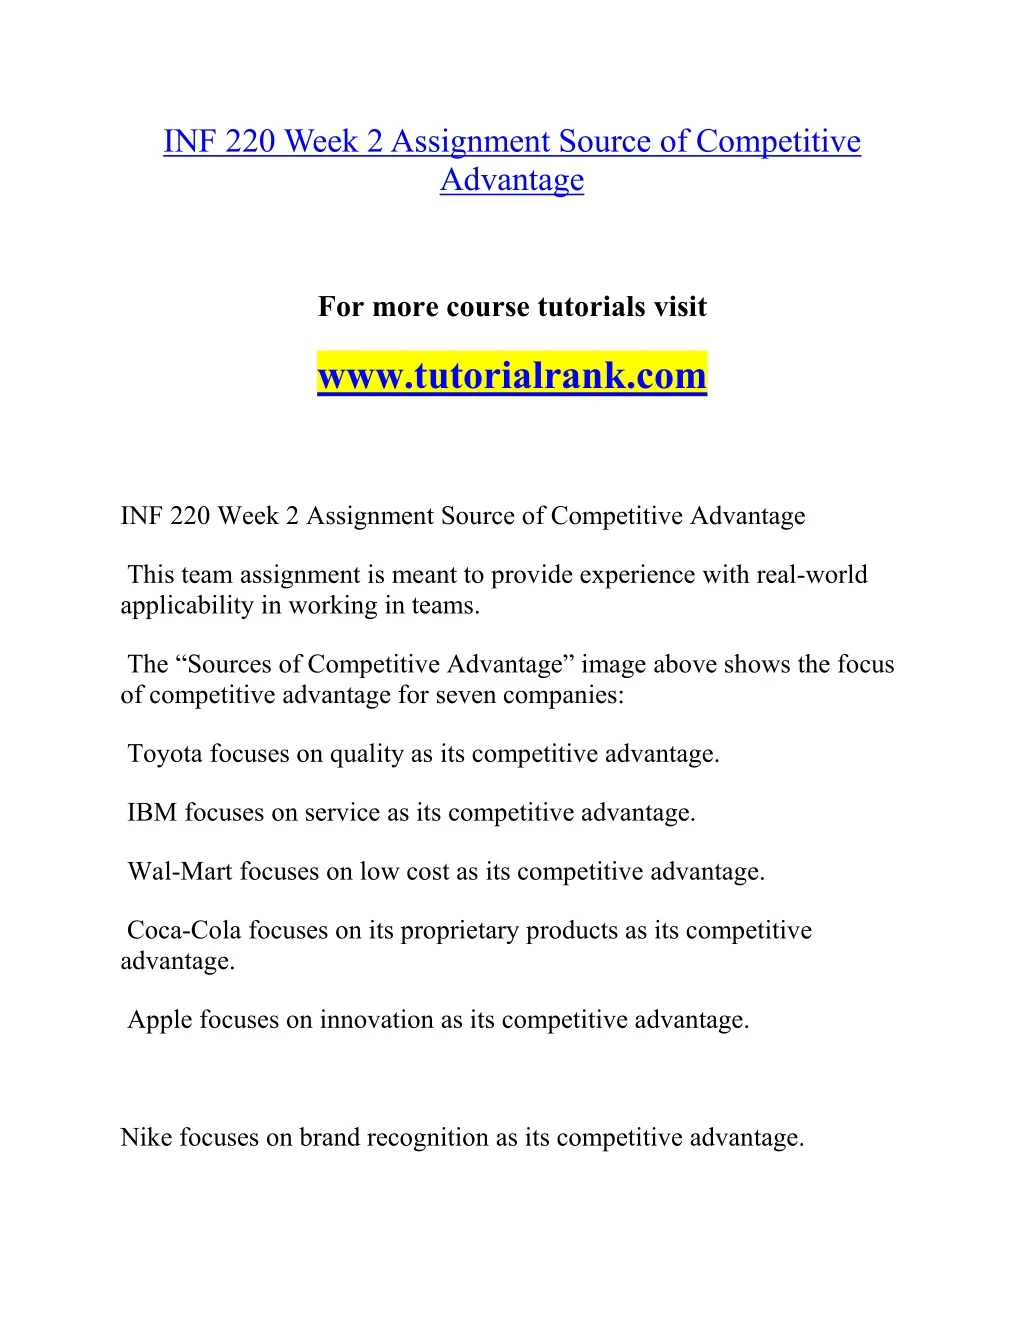 inf 220 week 2assignment source of competitive